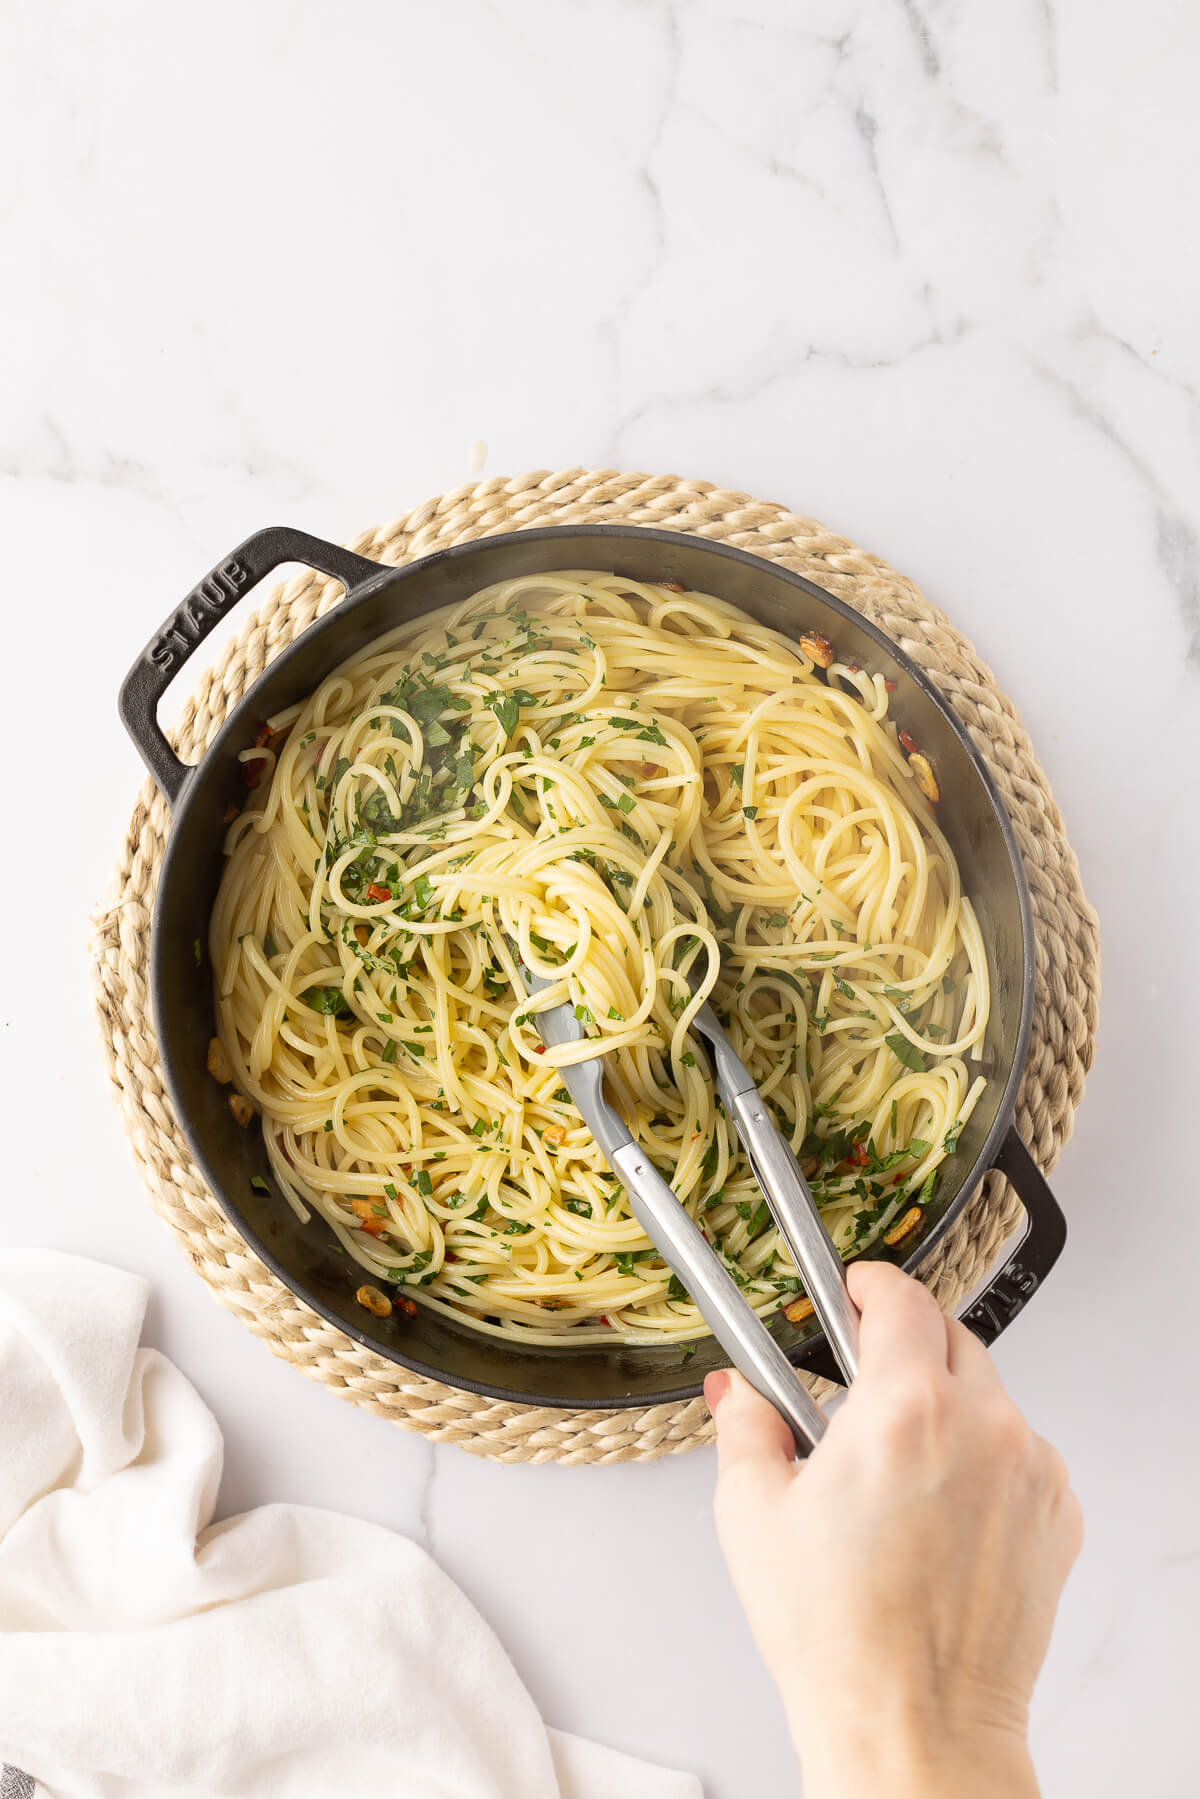 Tongs toss together cooked spaghetti with fresh parsley, olive oil, garlic, and peperoncino.